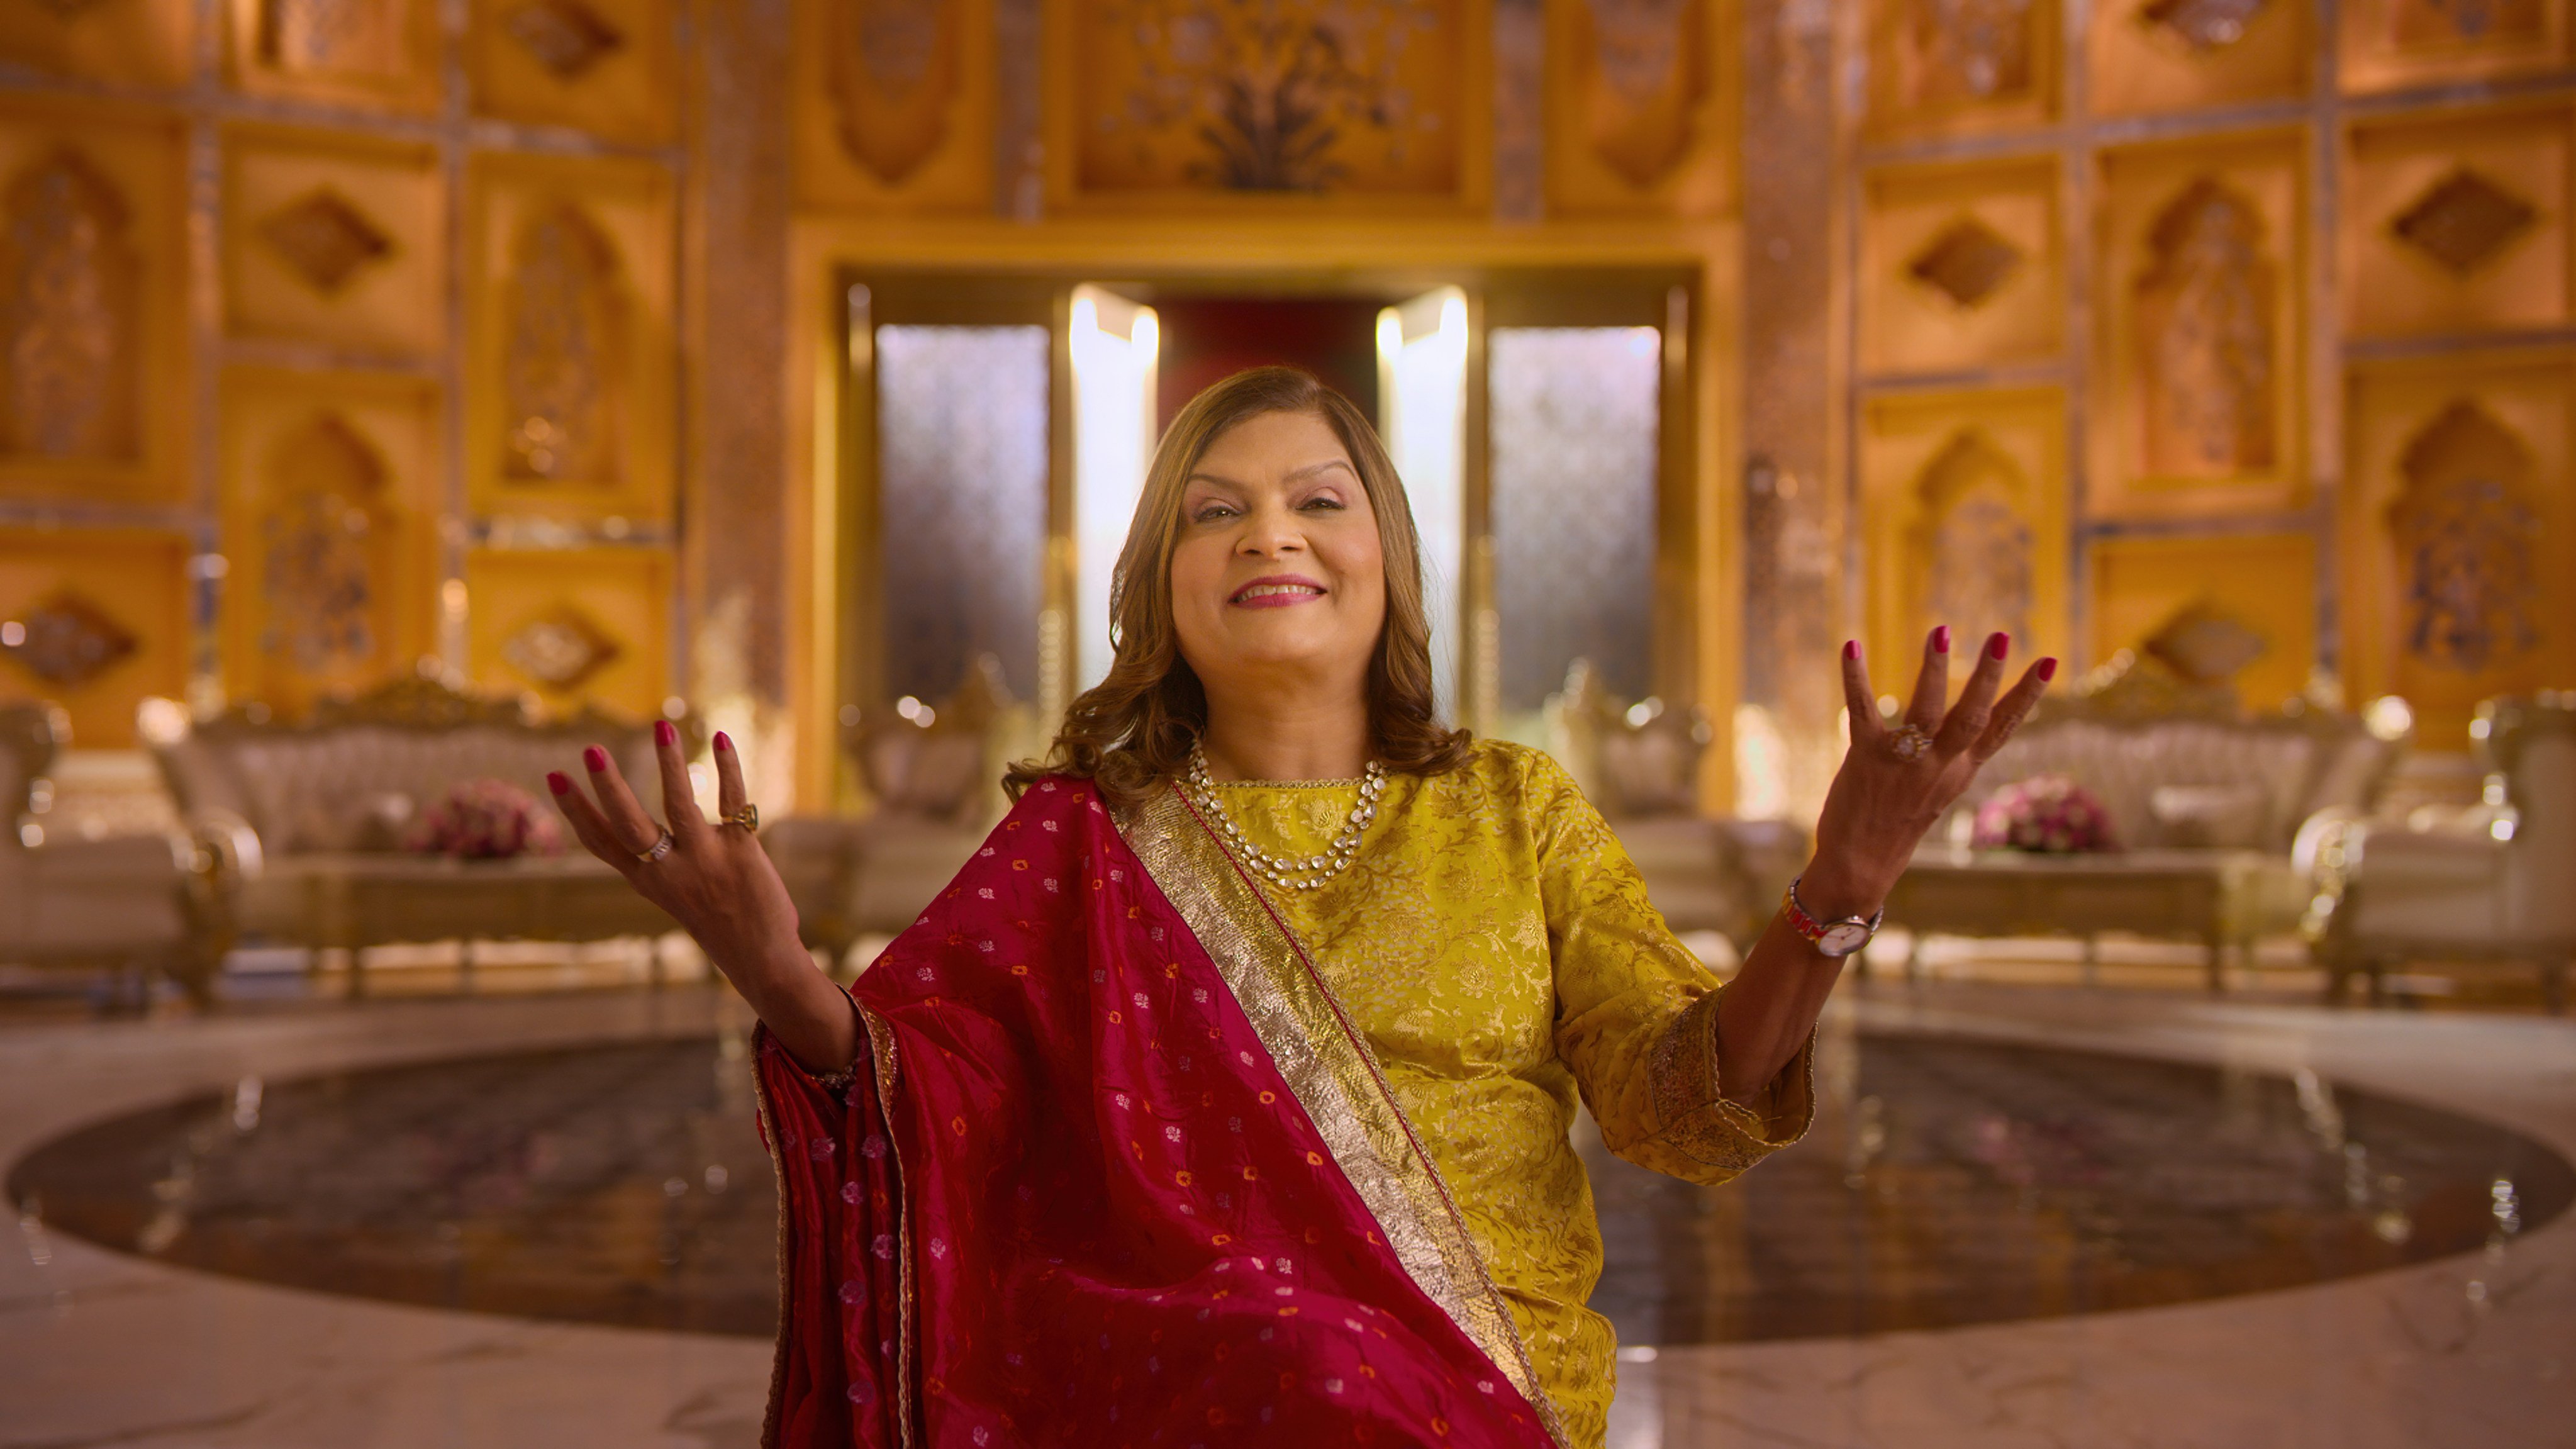 Sima Taparia is the star of Netflix’s Indian Matchmaking. Photo: Netflix